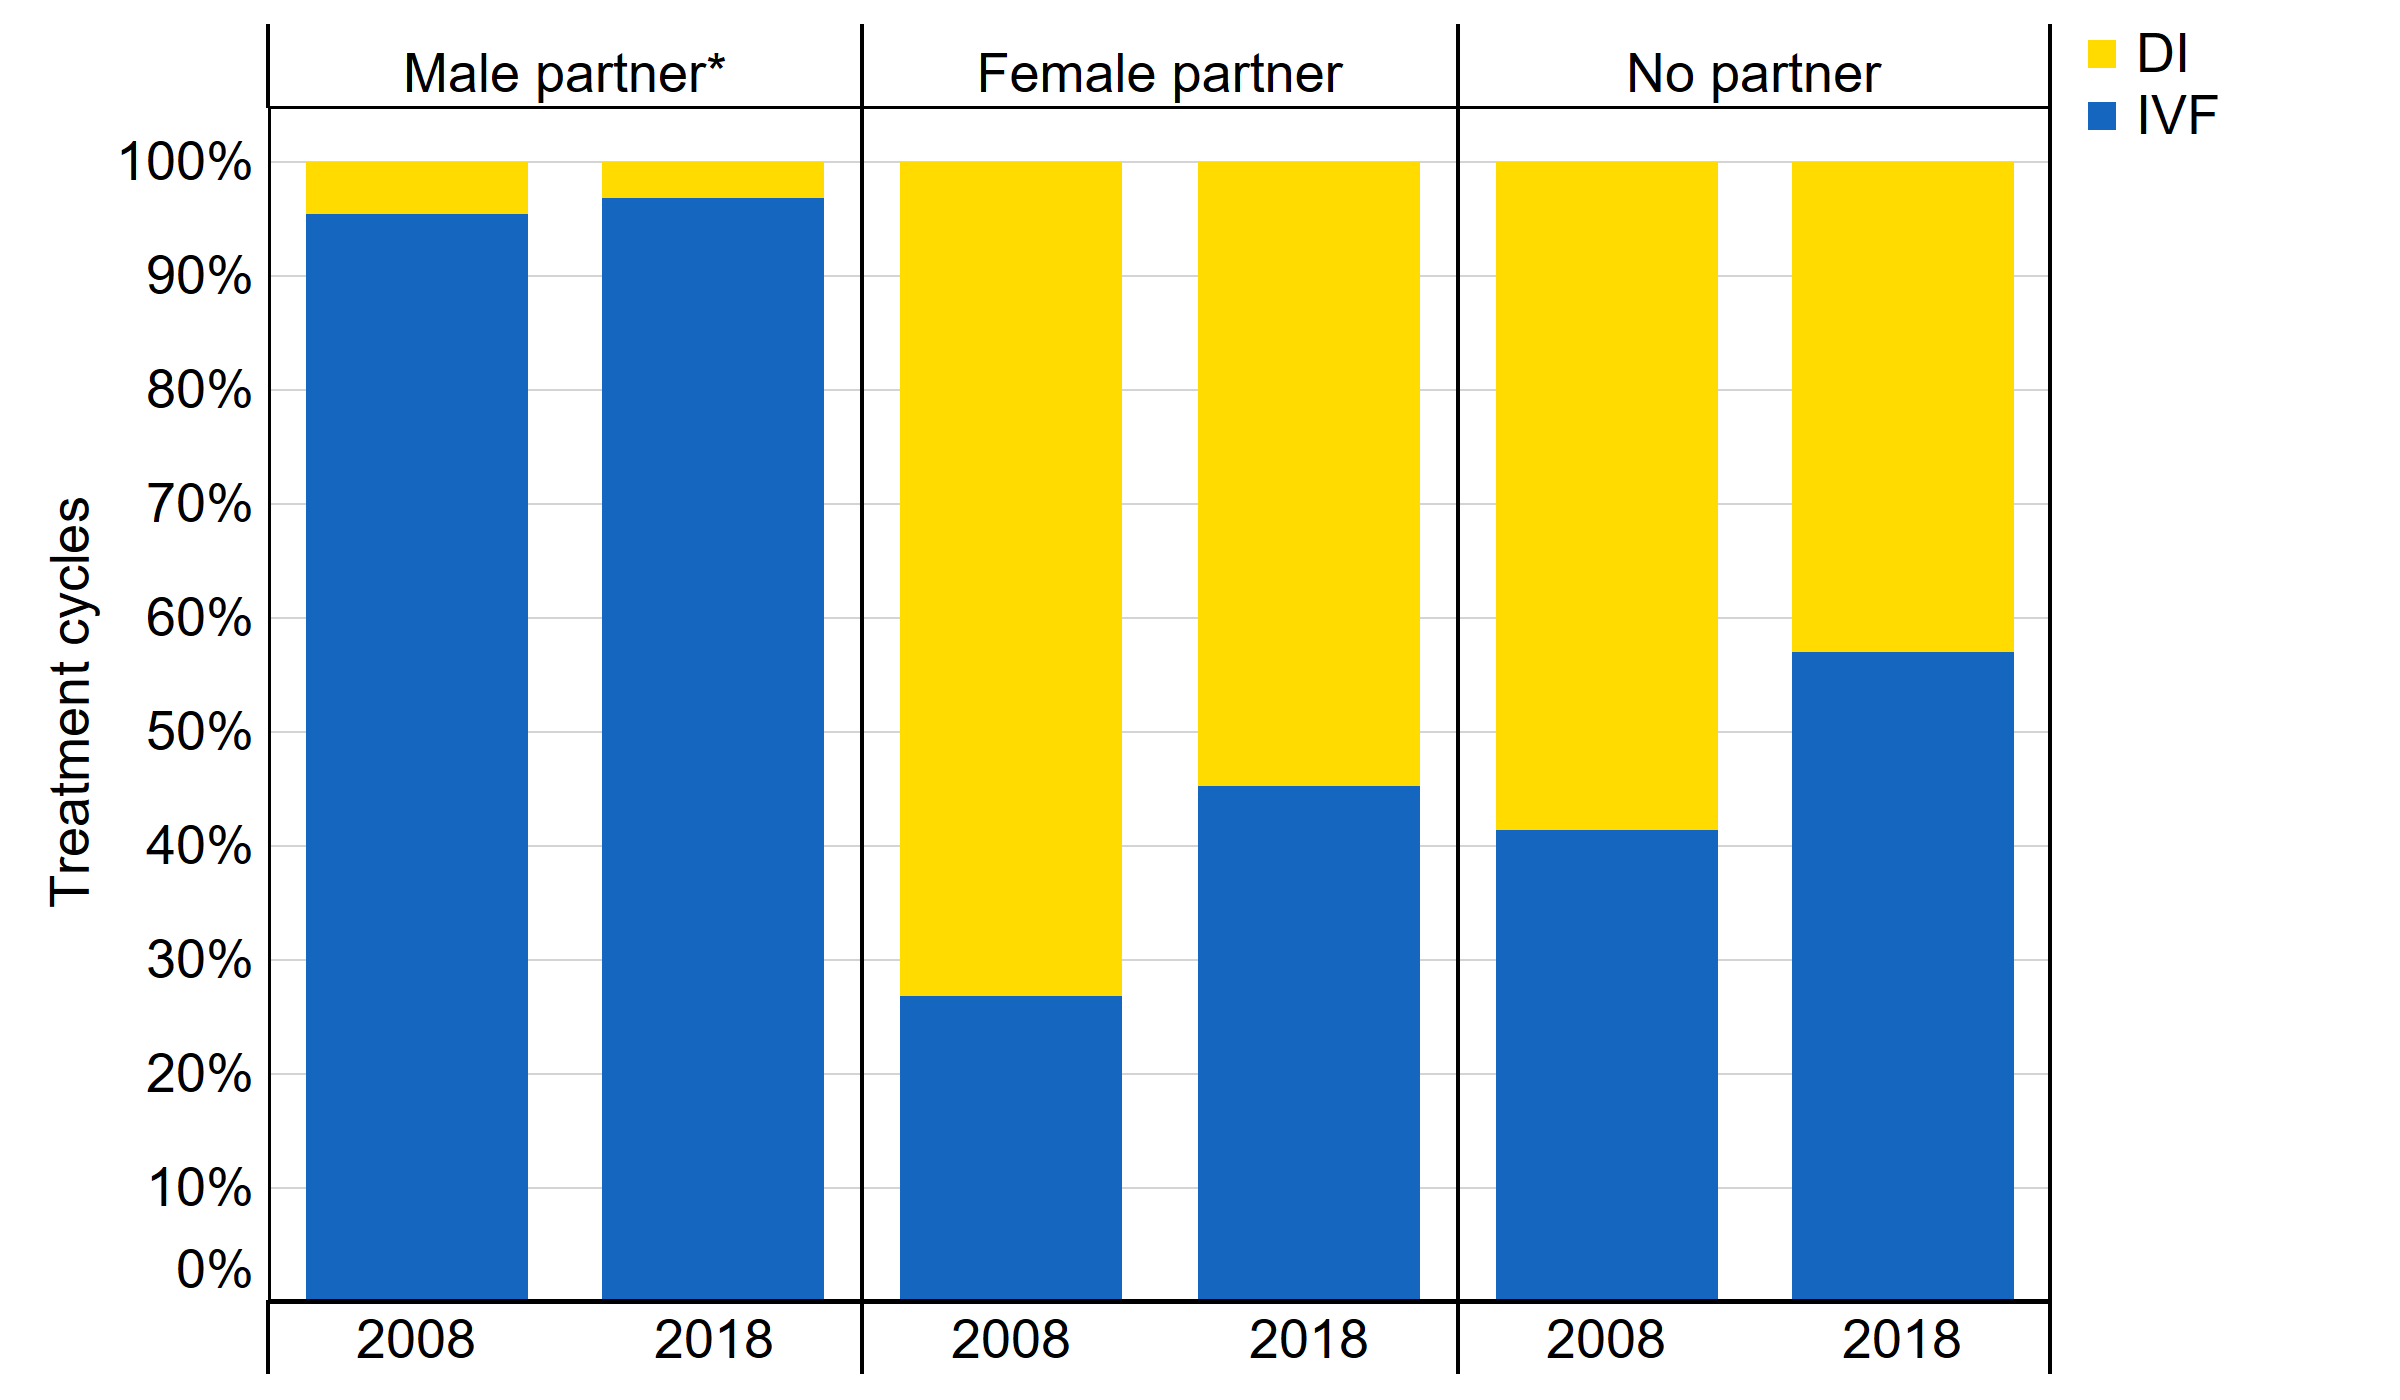 [1. Label] IVF and DI treatment cycle proportions by partner type, 2008 and 2018. [2. Construction] This stacked bar graph shows the proportions of cycles using IVF and DI by partner type for 2008 and 2018. [3. Summary] IVF usage as a proportion of cycles has increased for patients in female same-sex relationships and single patients but has not changed for patients with male partners. IVF is not the most common treatment for single patients in 2018. [4. Data] The figures are Year, Male partner IVF, Male partner DI, Female partner IVF, Female partner DI, No partner IVF, No partner DI: 2008, 95%, 5%, 27%, 73%, 41%, 59% 2018, 97%, 3%, 45%, 55%, 57%, 43%.